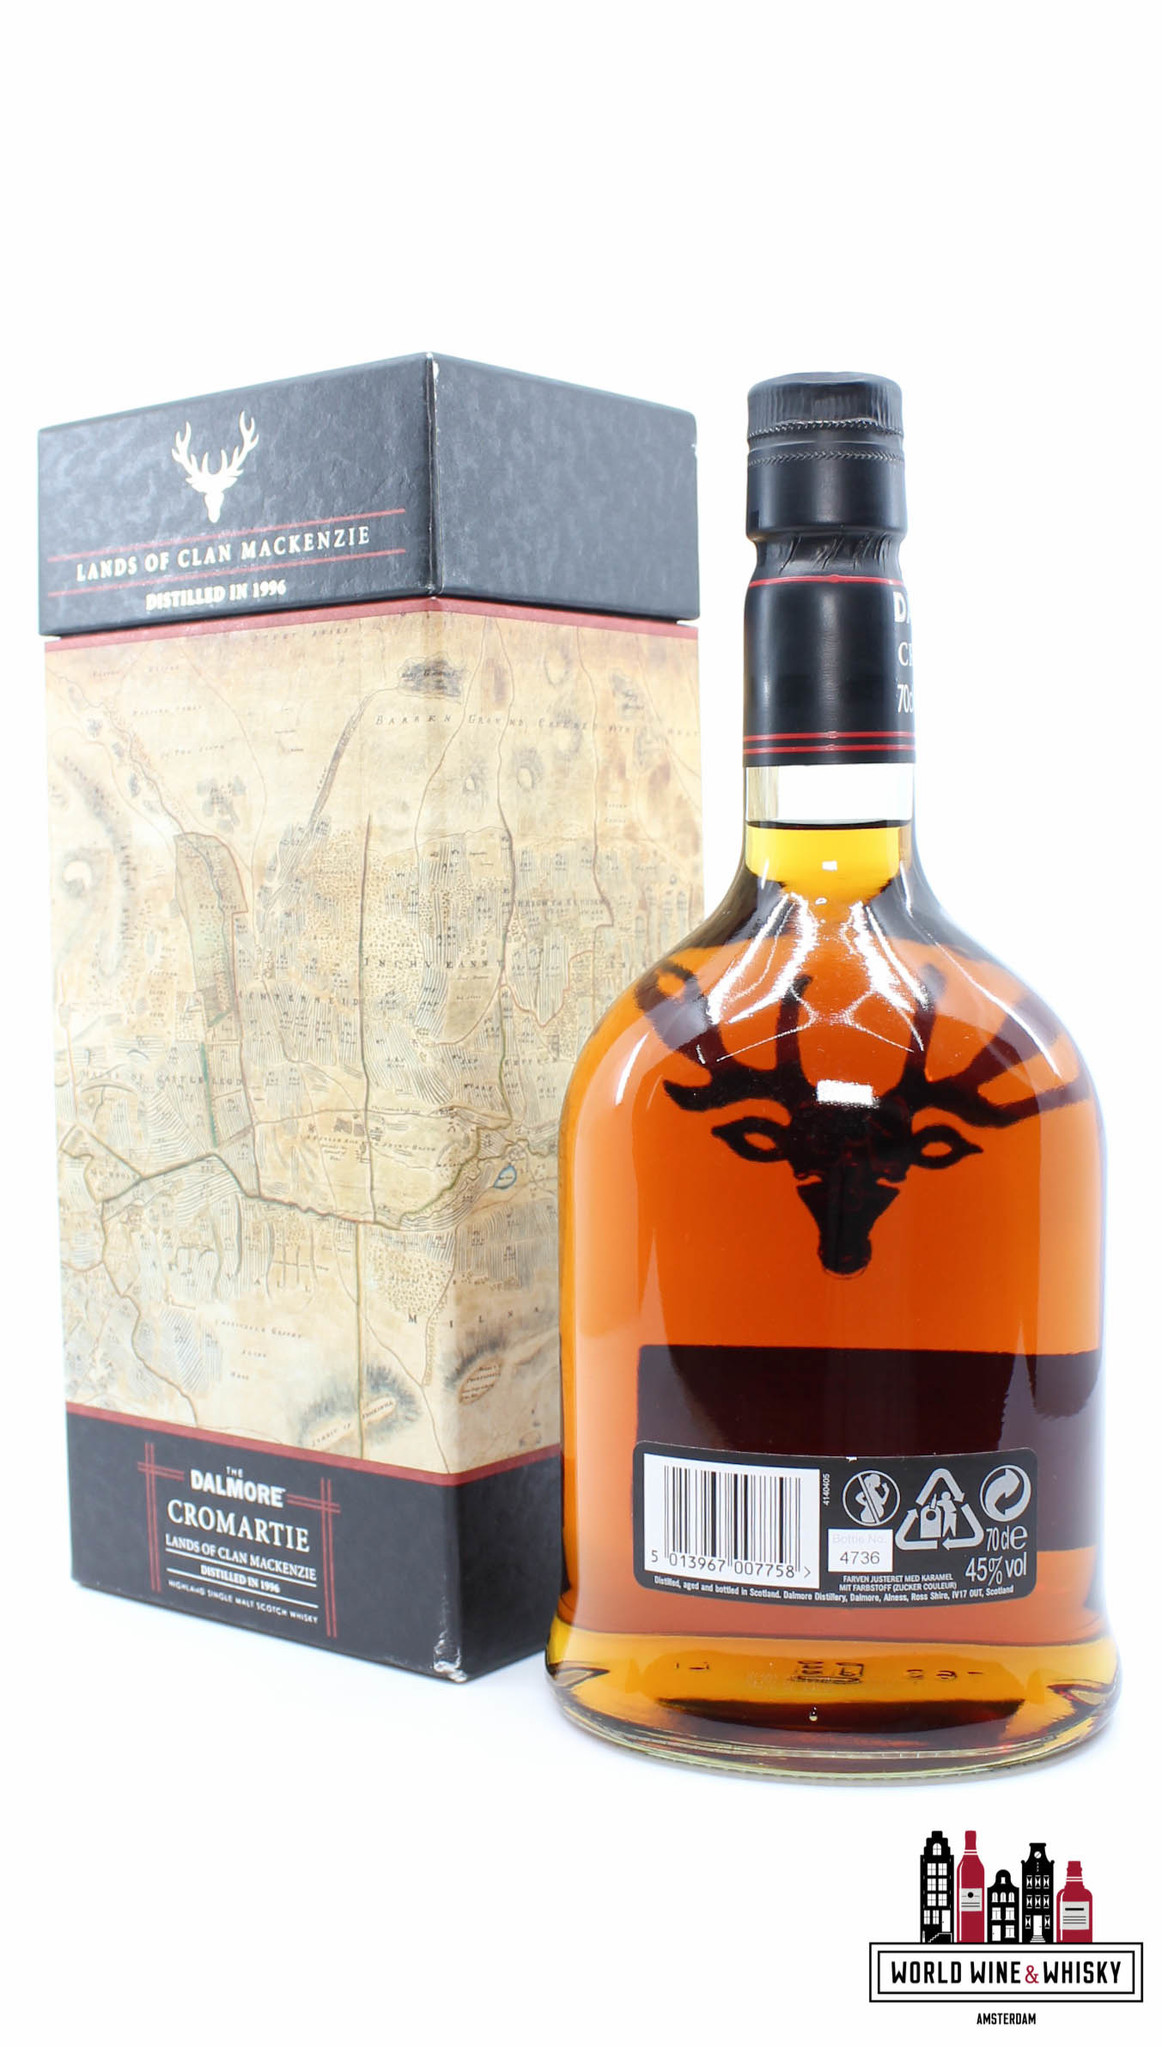 Dalmore Dalmore 15 Years Old 1996 2012 - Cromartie - Lands of Clan MacKenzie 45% (1 of 7500)